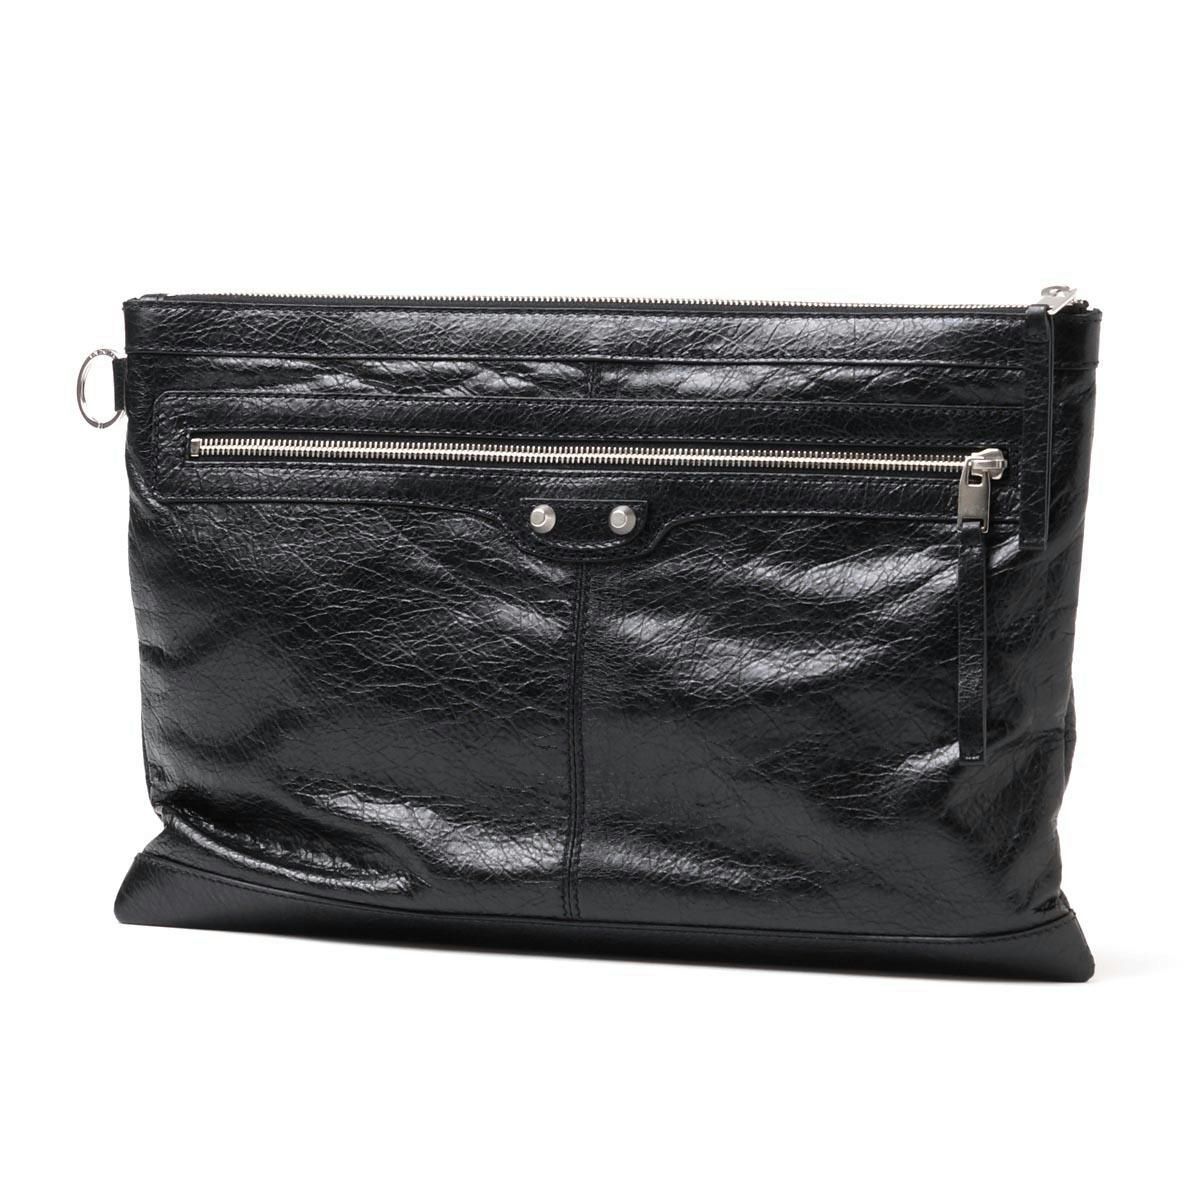 Balenciaga Clutch Oversized Black in Textured Leather with Palladium US